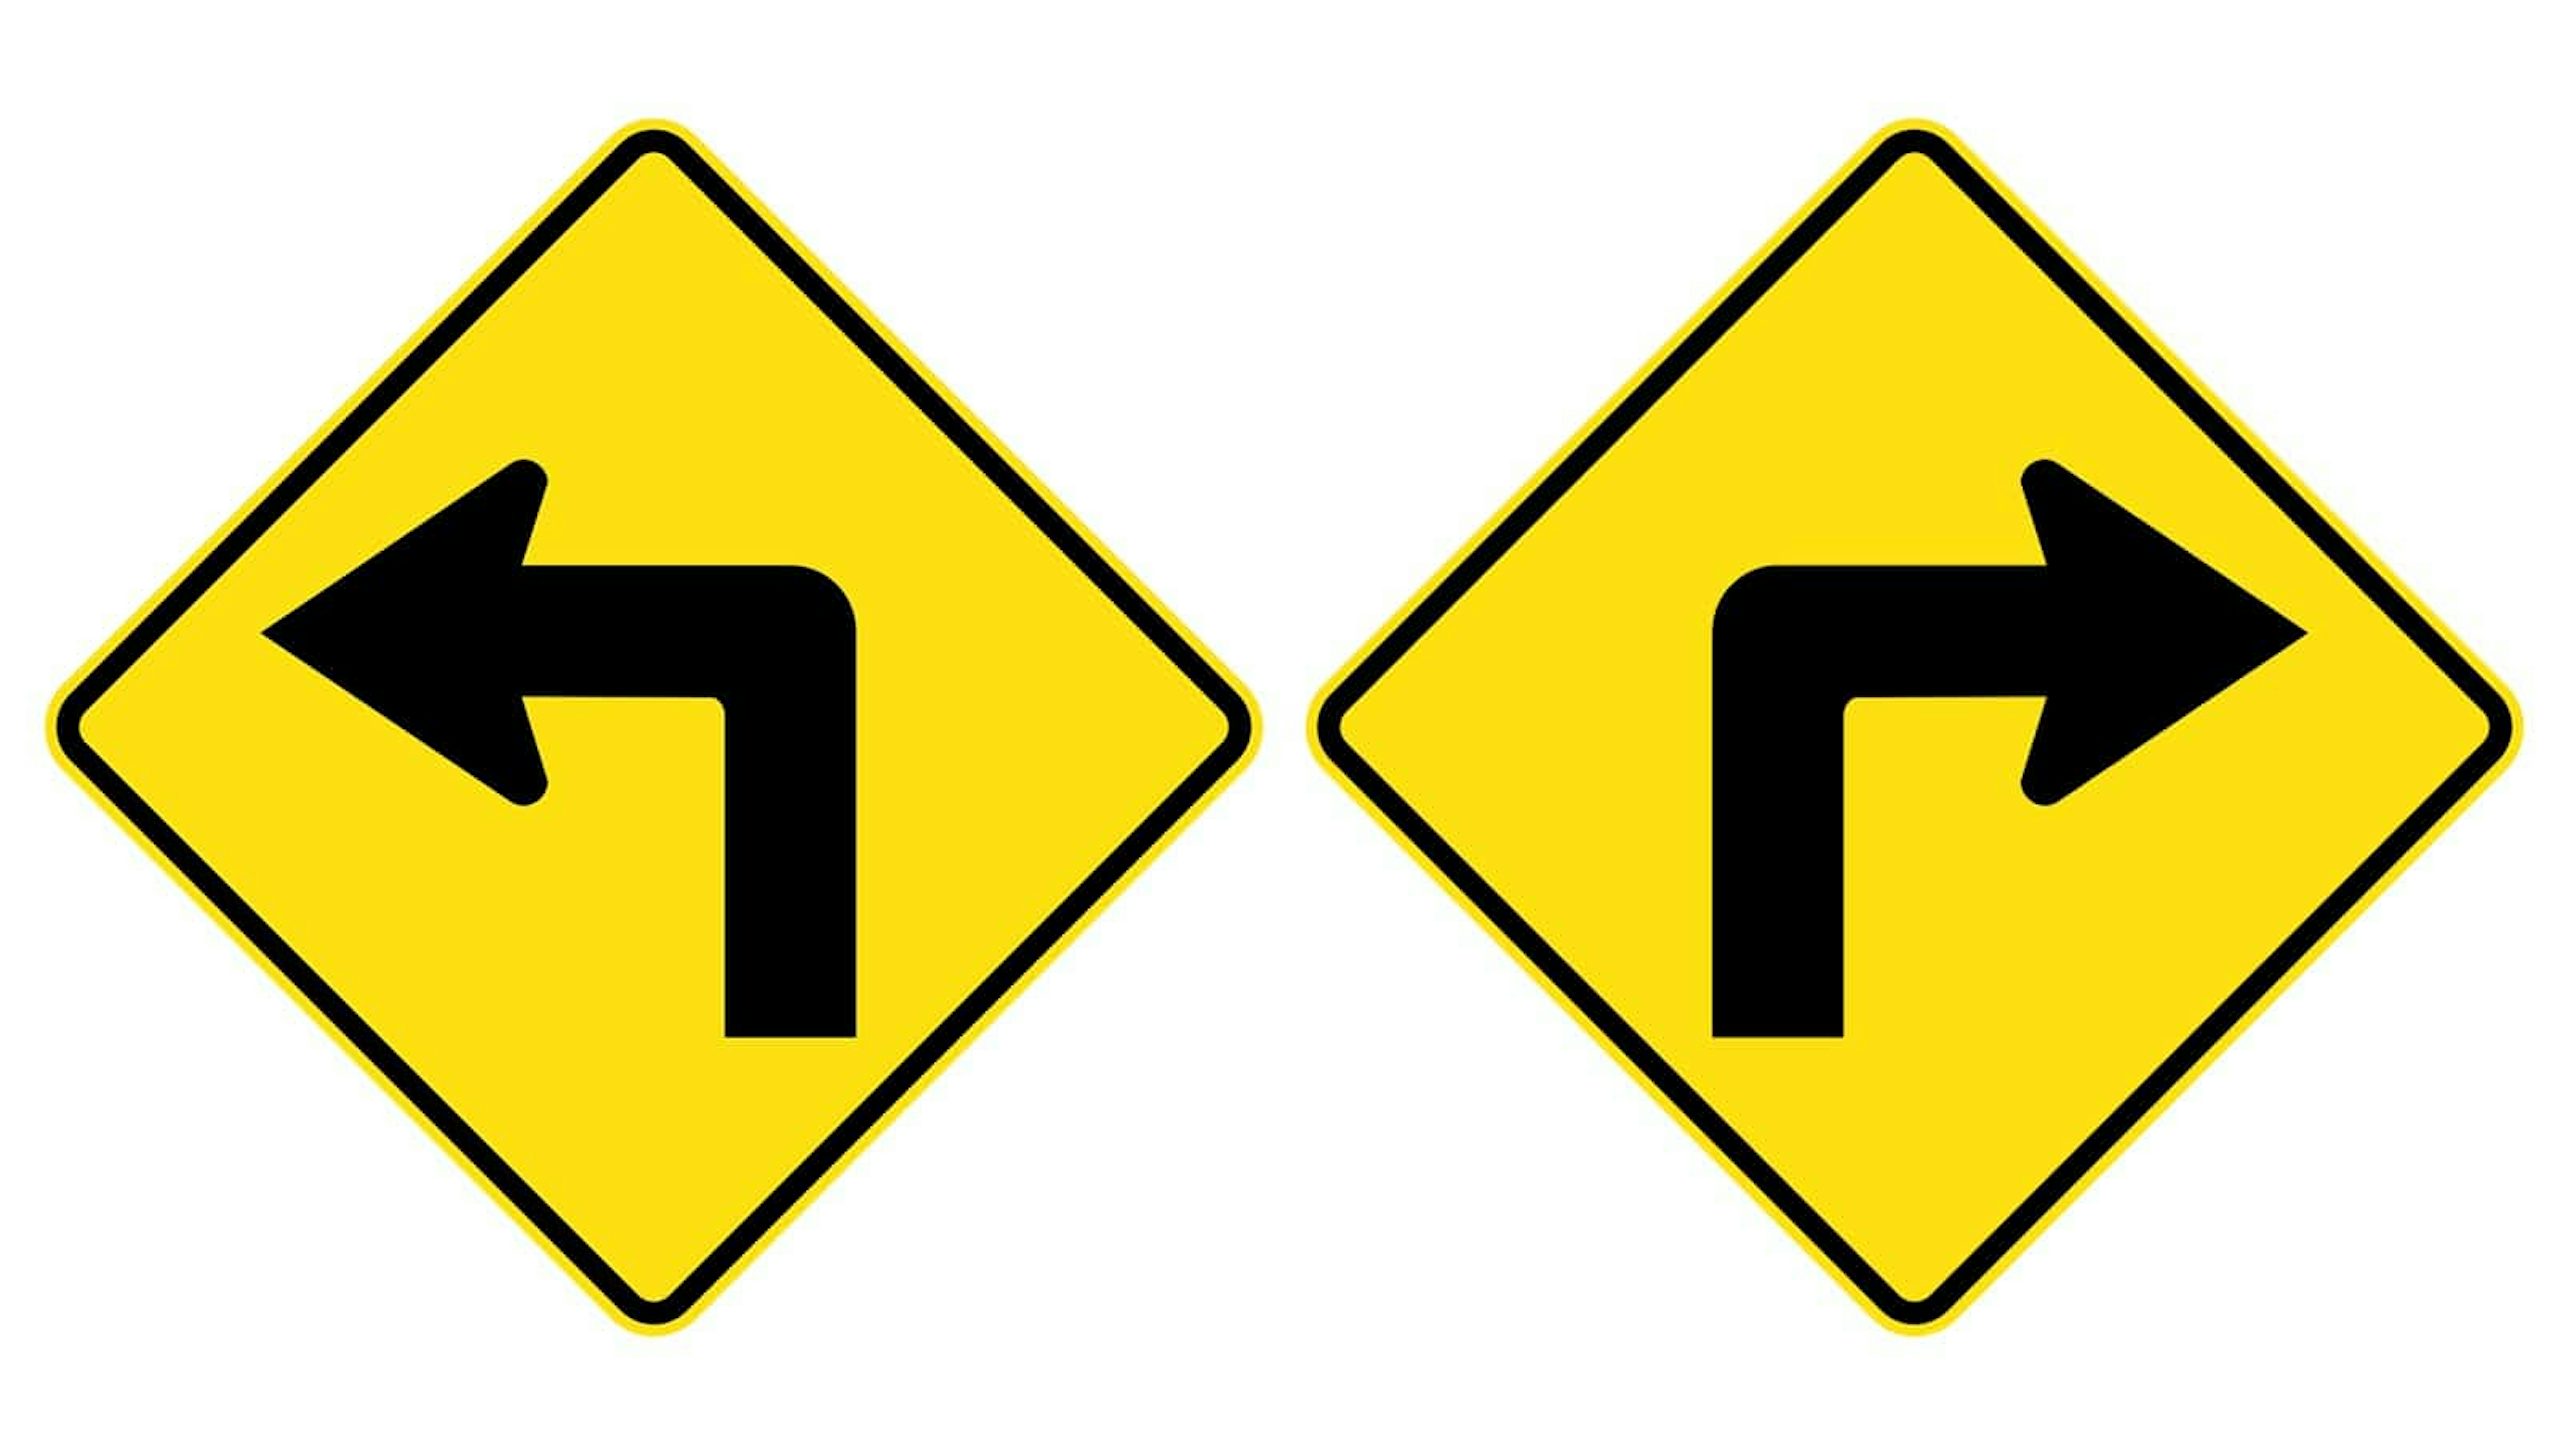 Bicycle Crossing Sign (Meaning, Shape, Color)